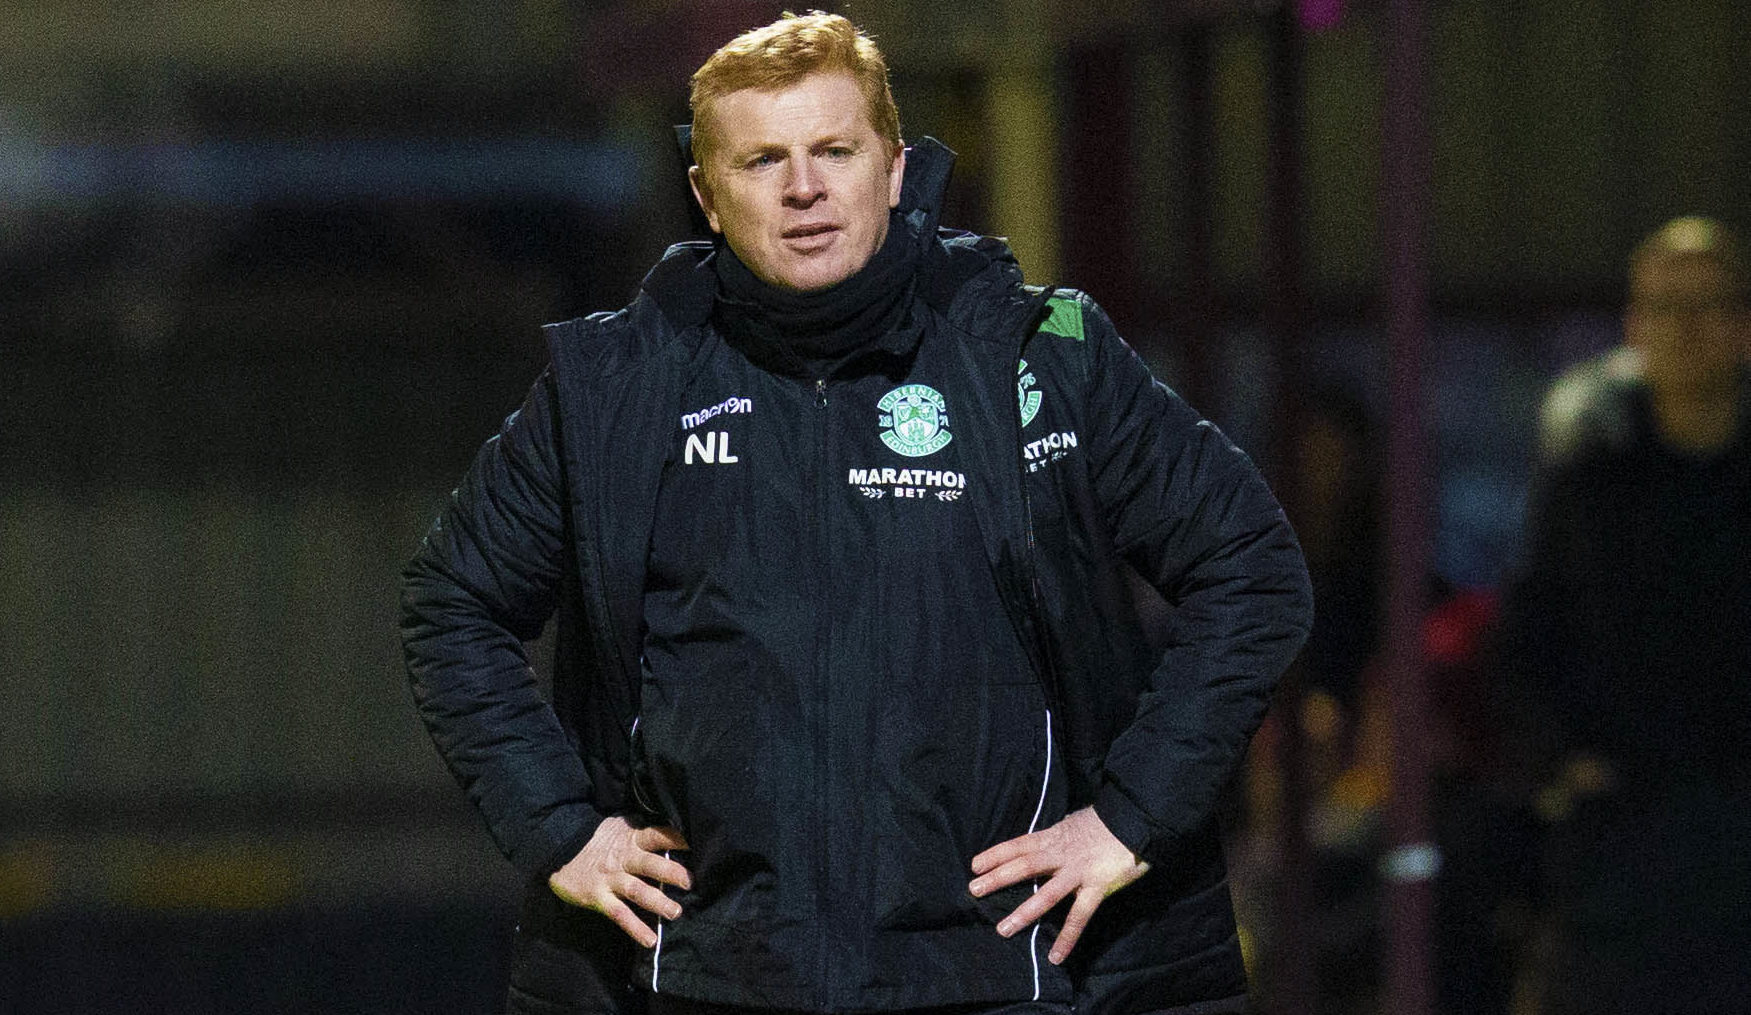 Hibs manager Neil Lennon frustrated on the touchline (SNS Group / Bruce White)